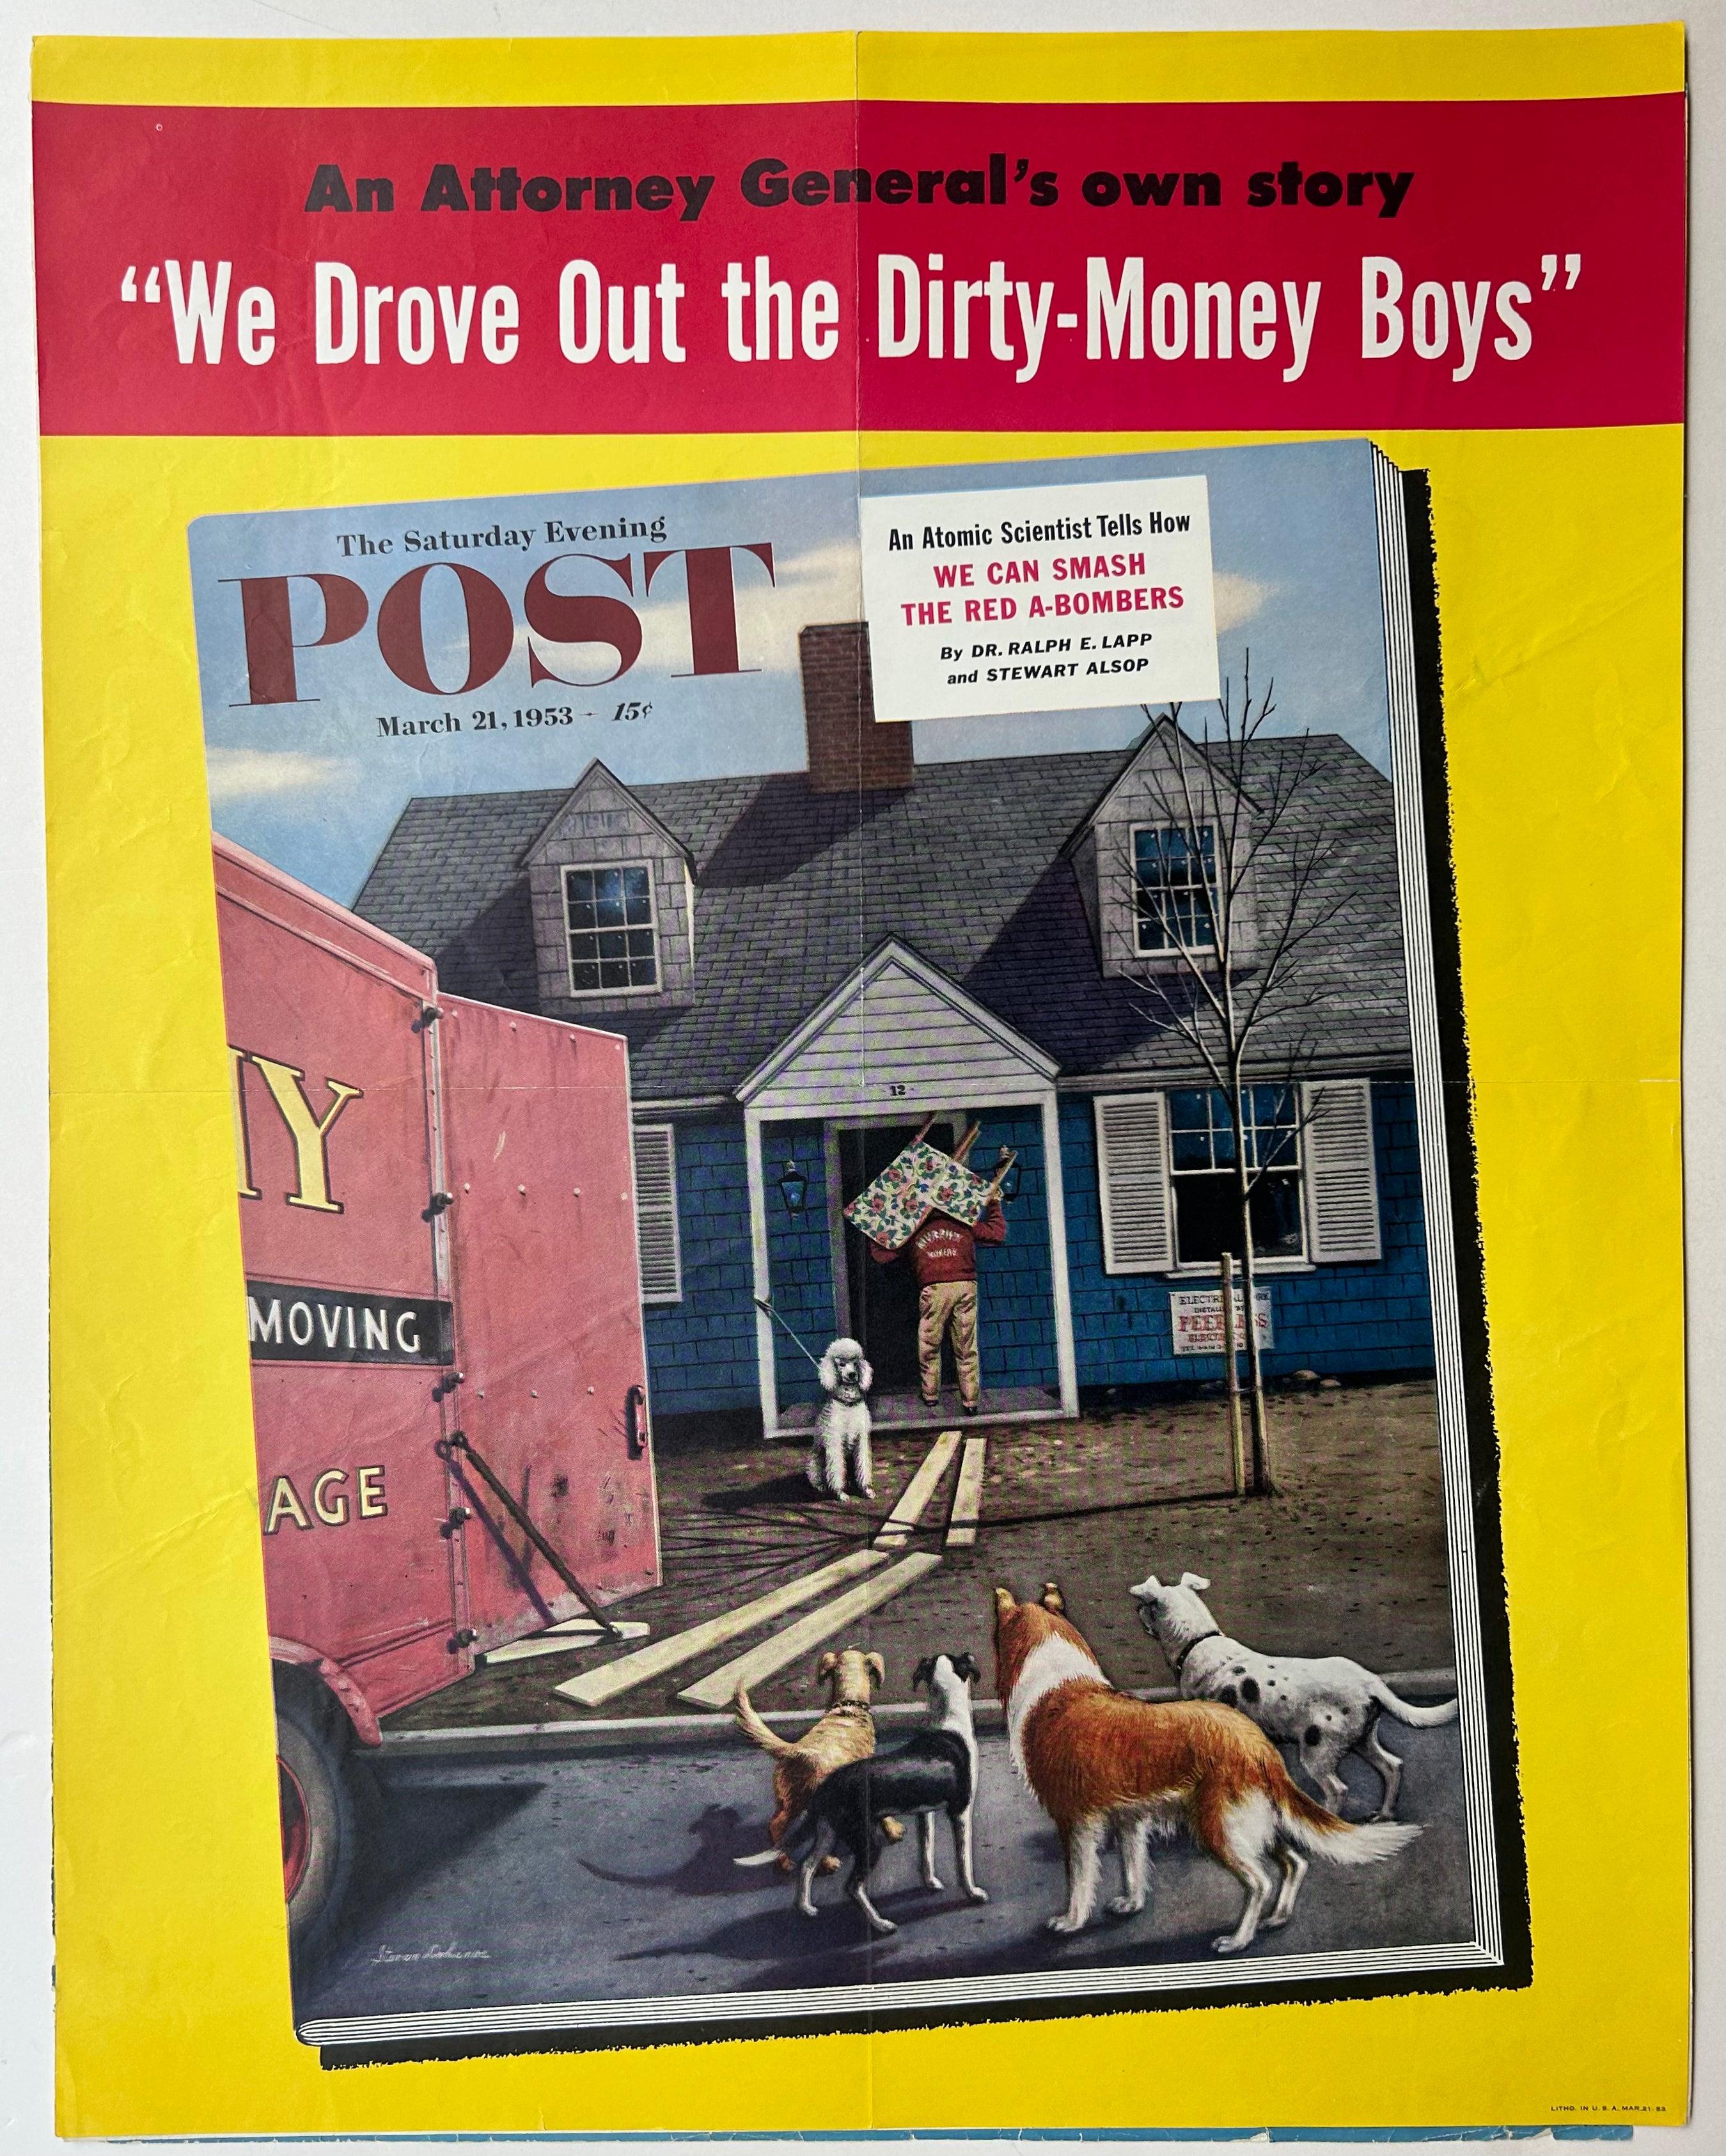 Saturday Evening Post March 21, 1953 ✓